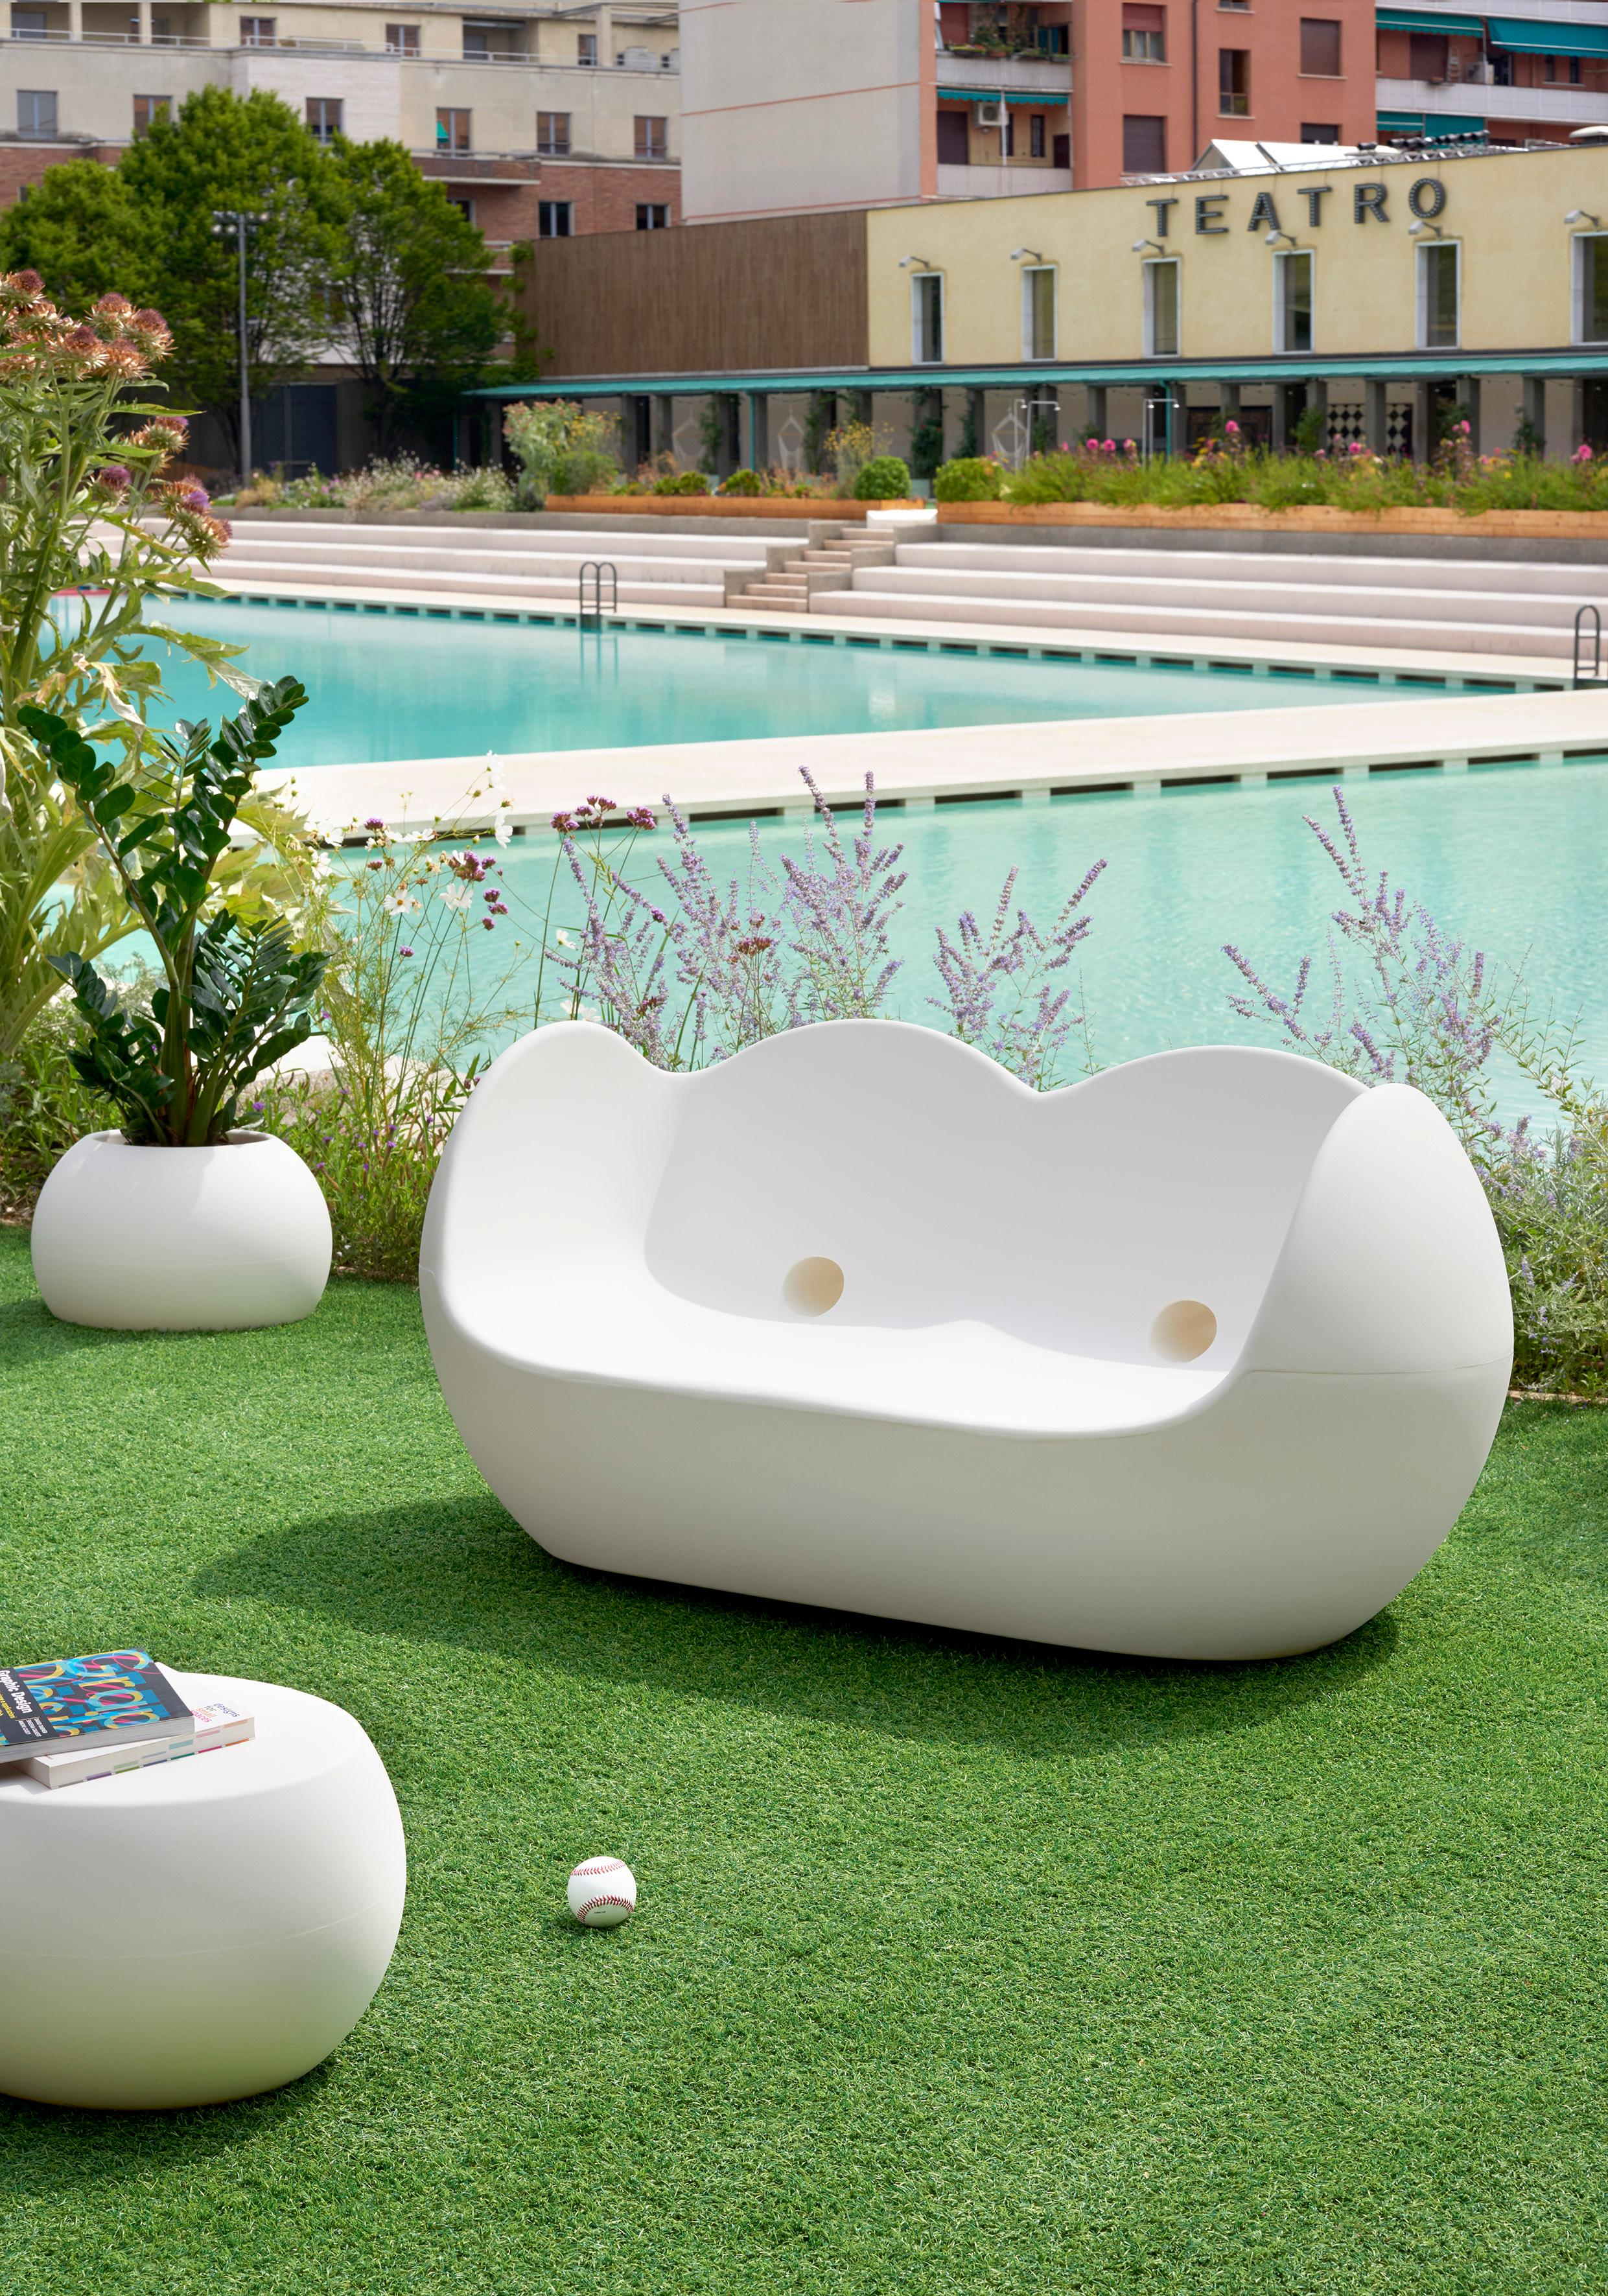 Powder Blue Blossy Rocking Sofa by Karim Rashid
Dimensions: D 85 x W 159 x H 75 cm. Seat Height: 34 cm.
Materials: Polyethylene.
Weight: 38 kg.

Available in different color options. This product is suitable for indoor and outdoor use. Please